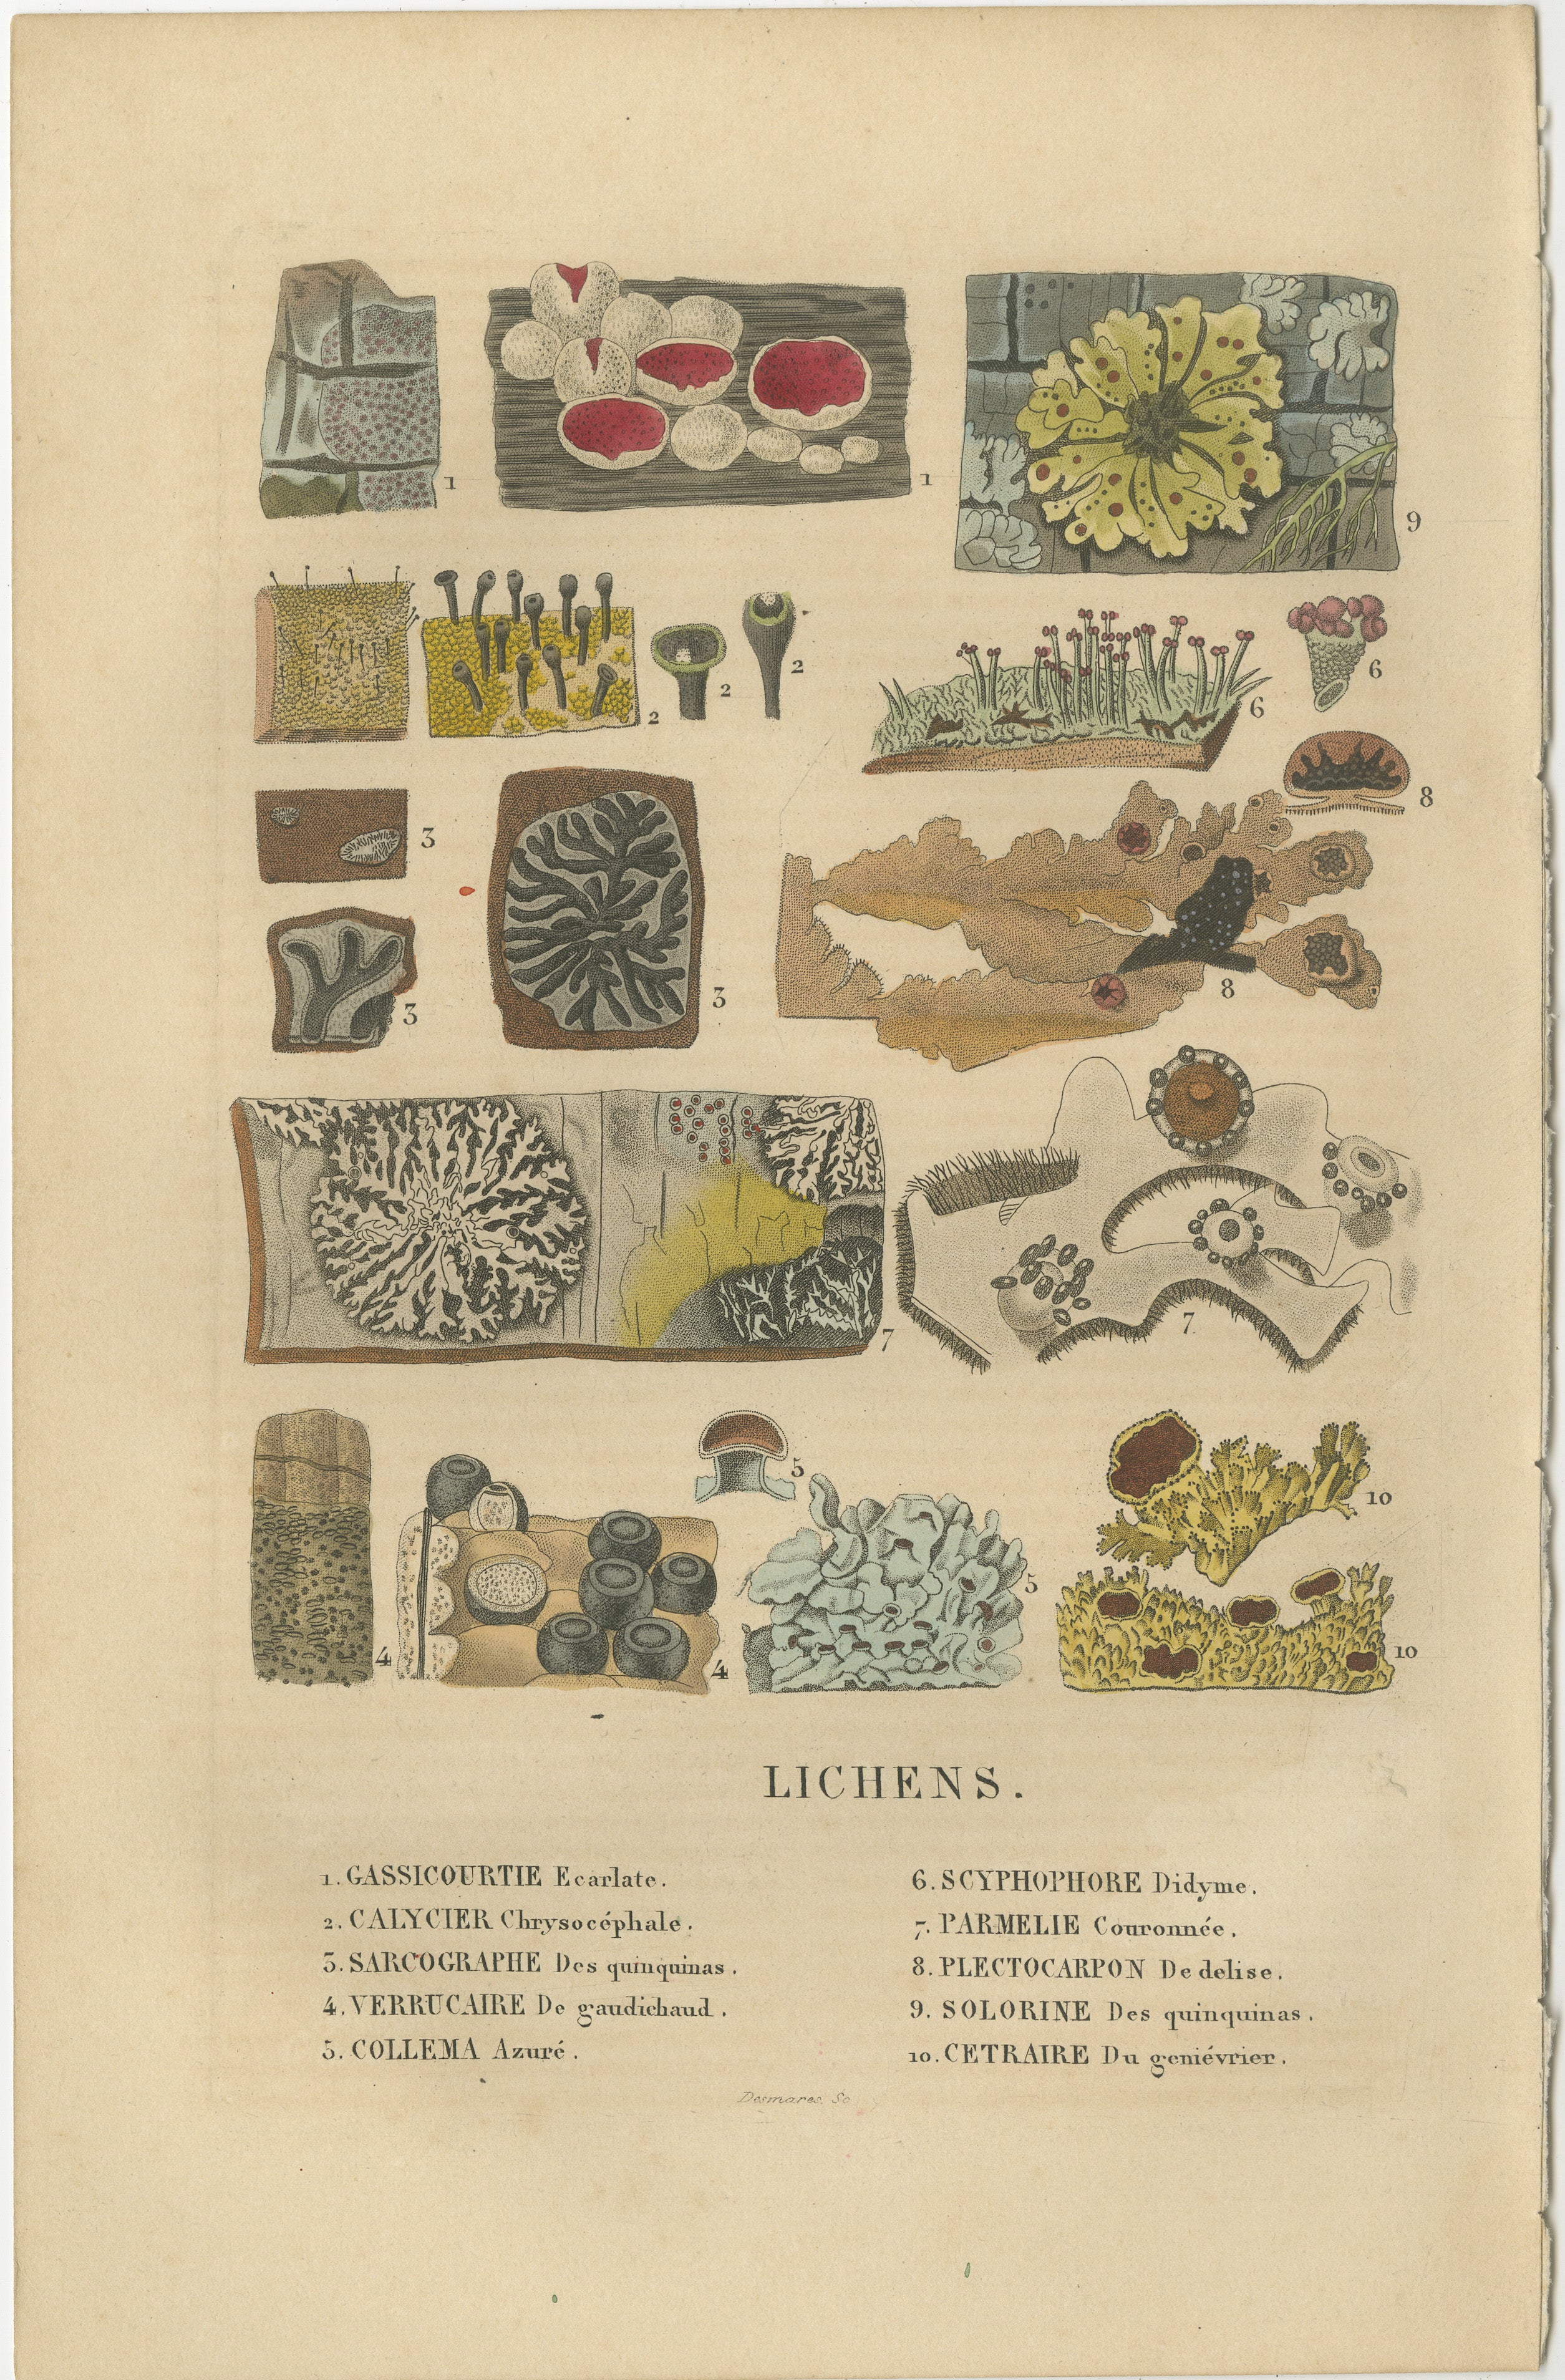 The image is an intricate hand-colored engraving showcasing a variety of lichen species. Lichens are symbiotic organisms composed of fungi and algae living together. They are known for their diverse forms and are often found growing on rocks, trees,